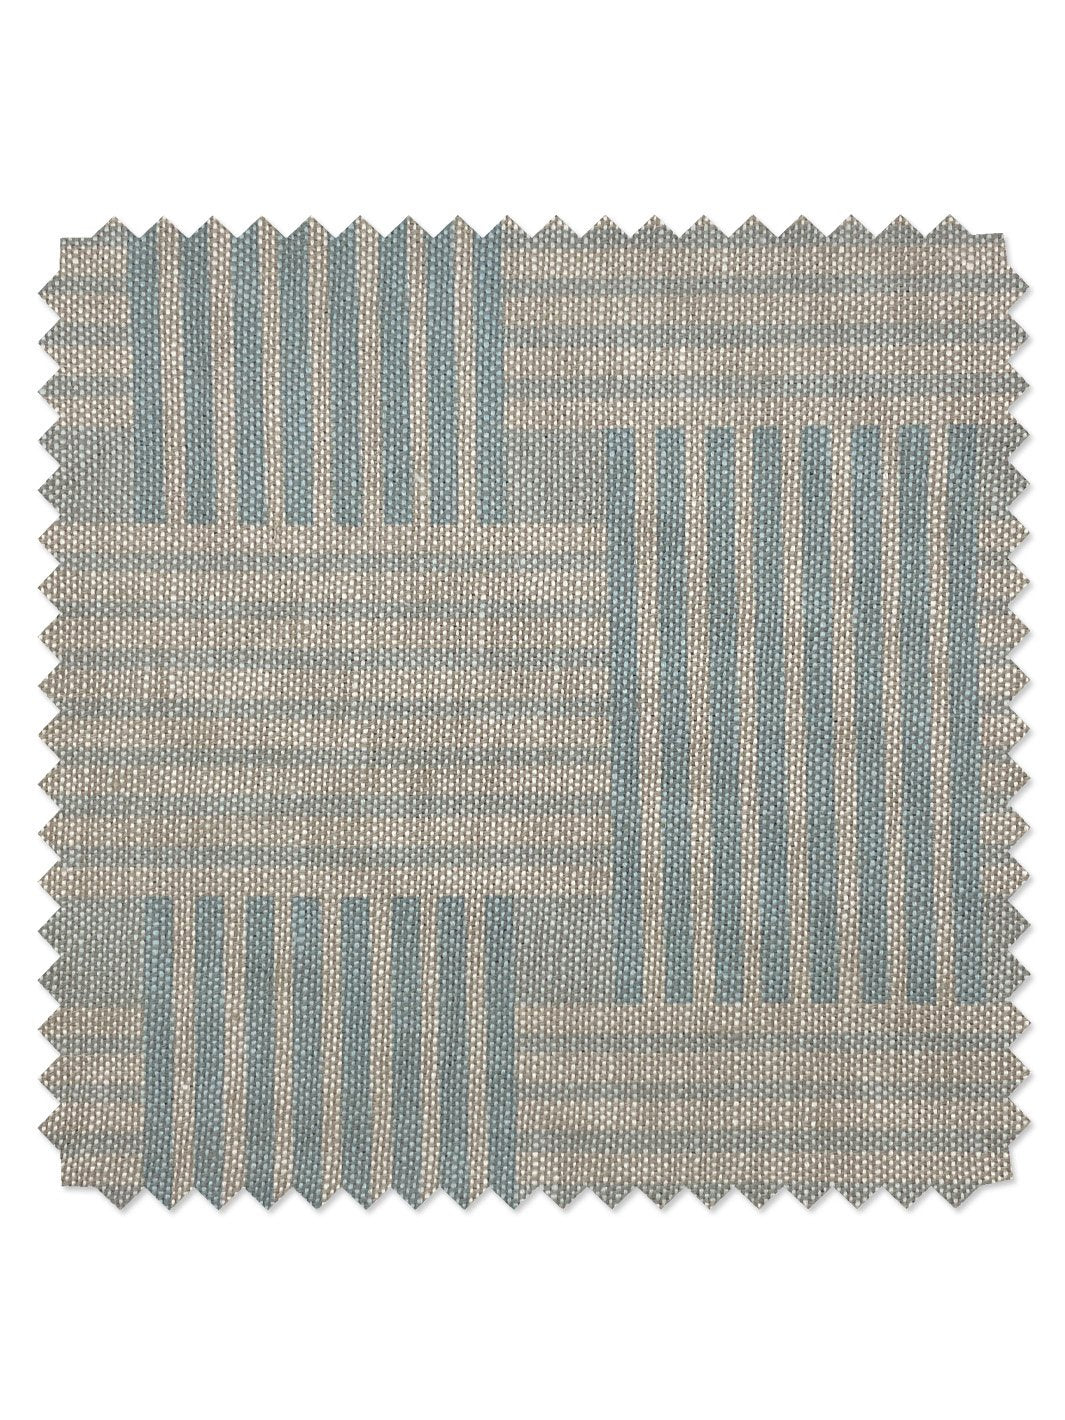 'Fabric by the Yard - Roman Holiday Woven - Pale Blue